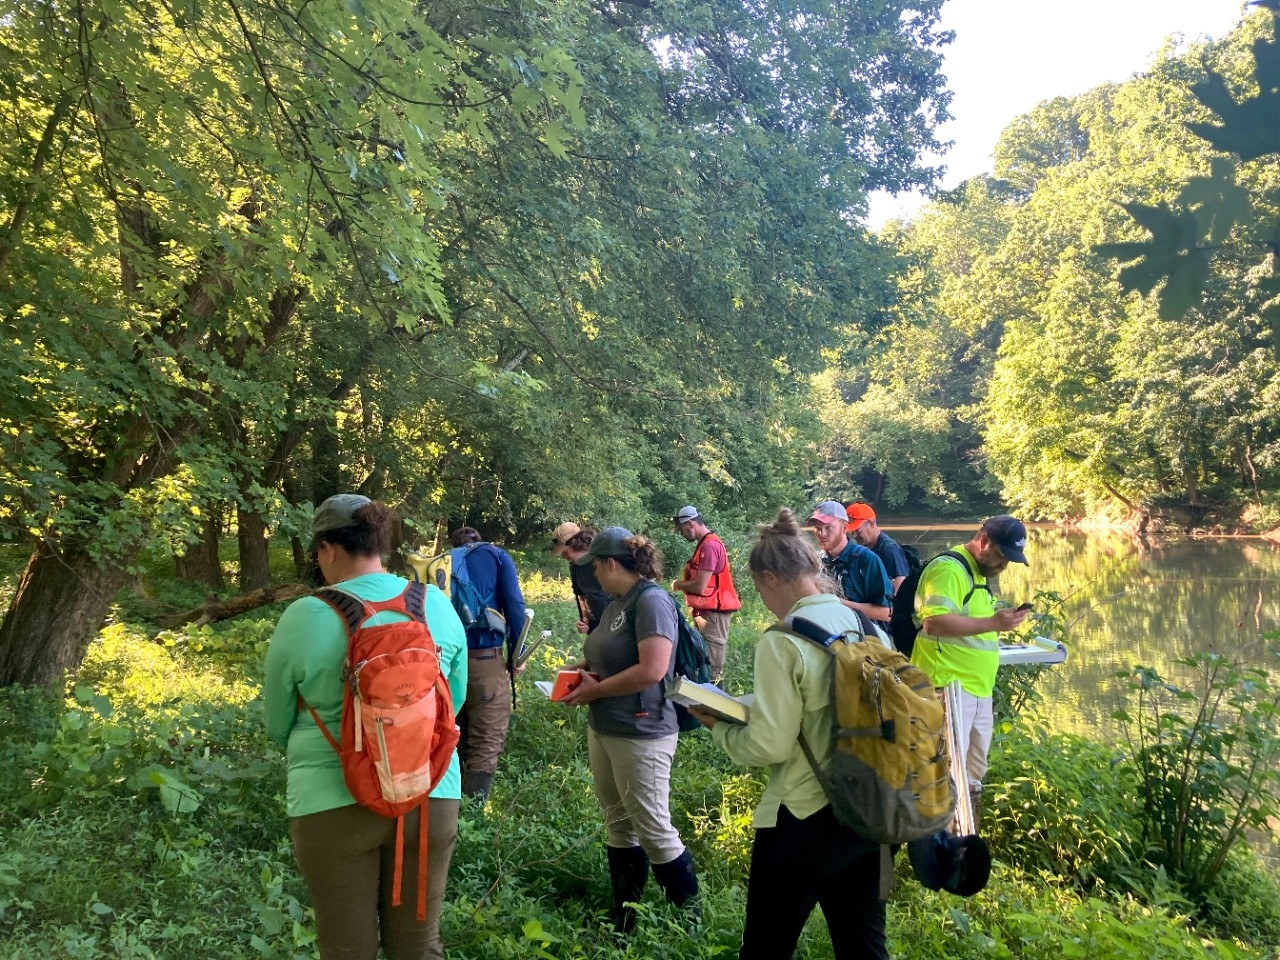 Wetland Management Professional Micro-credential Students in field near river